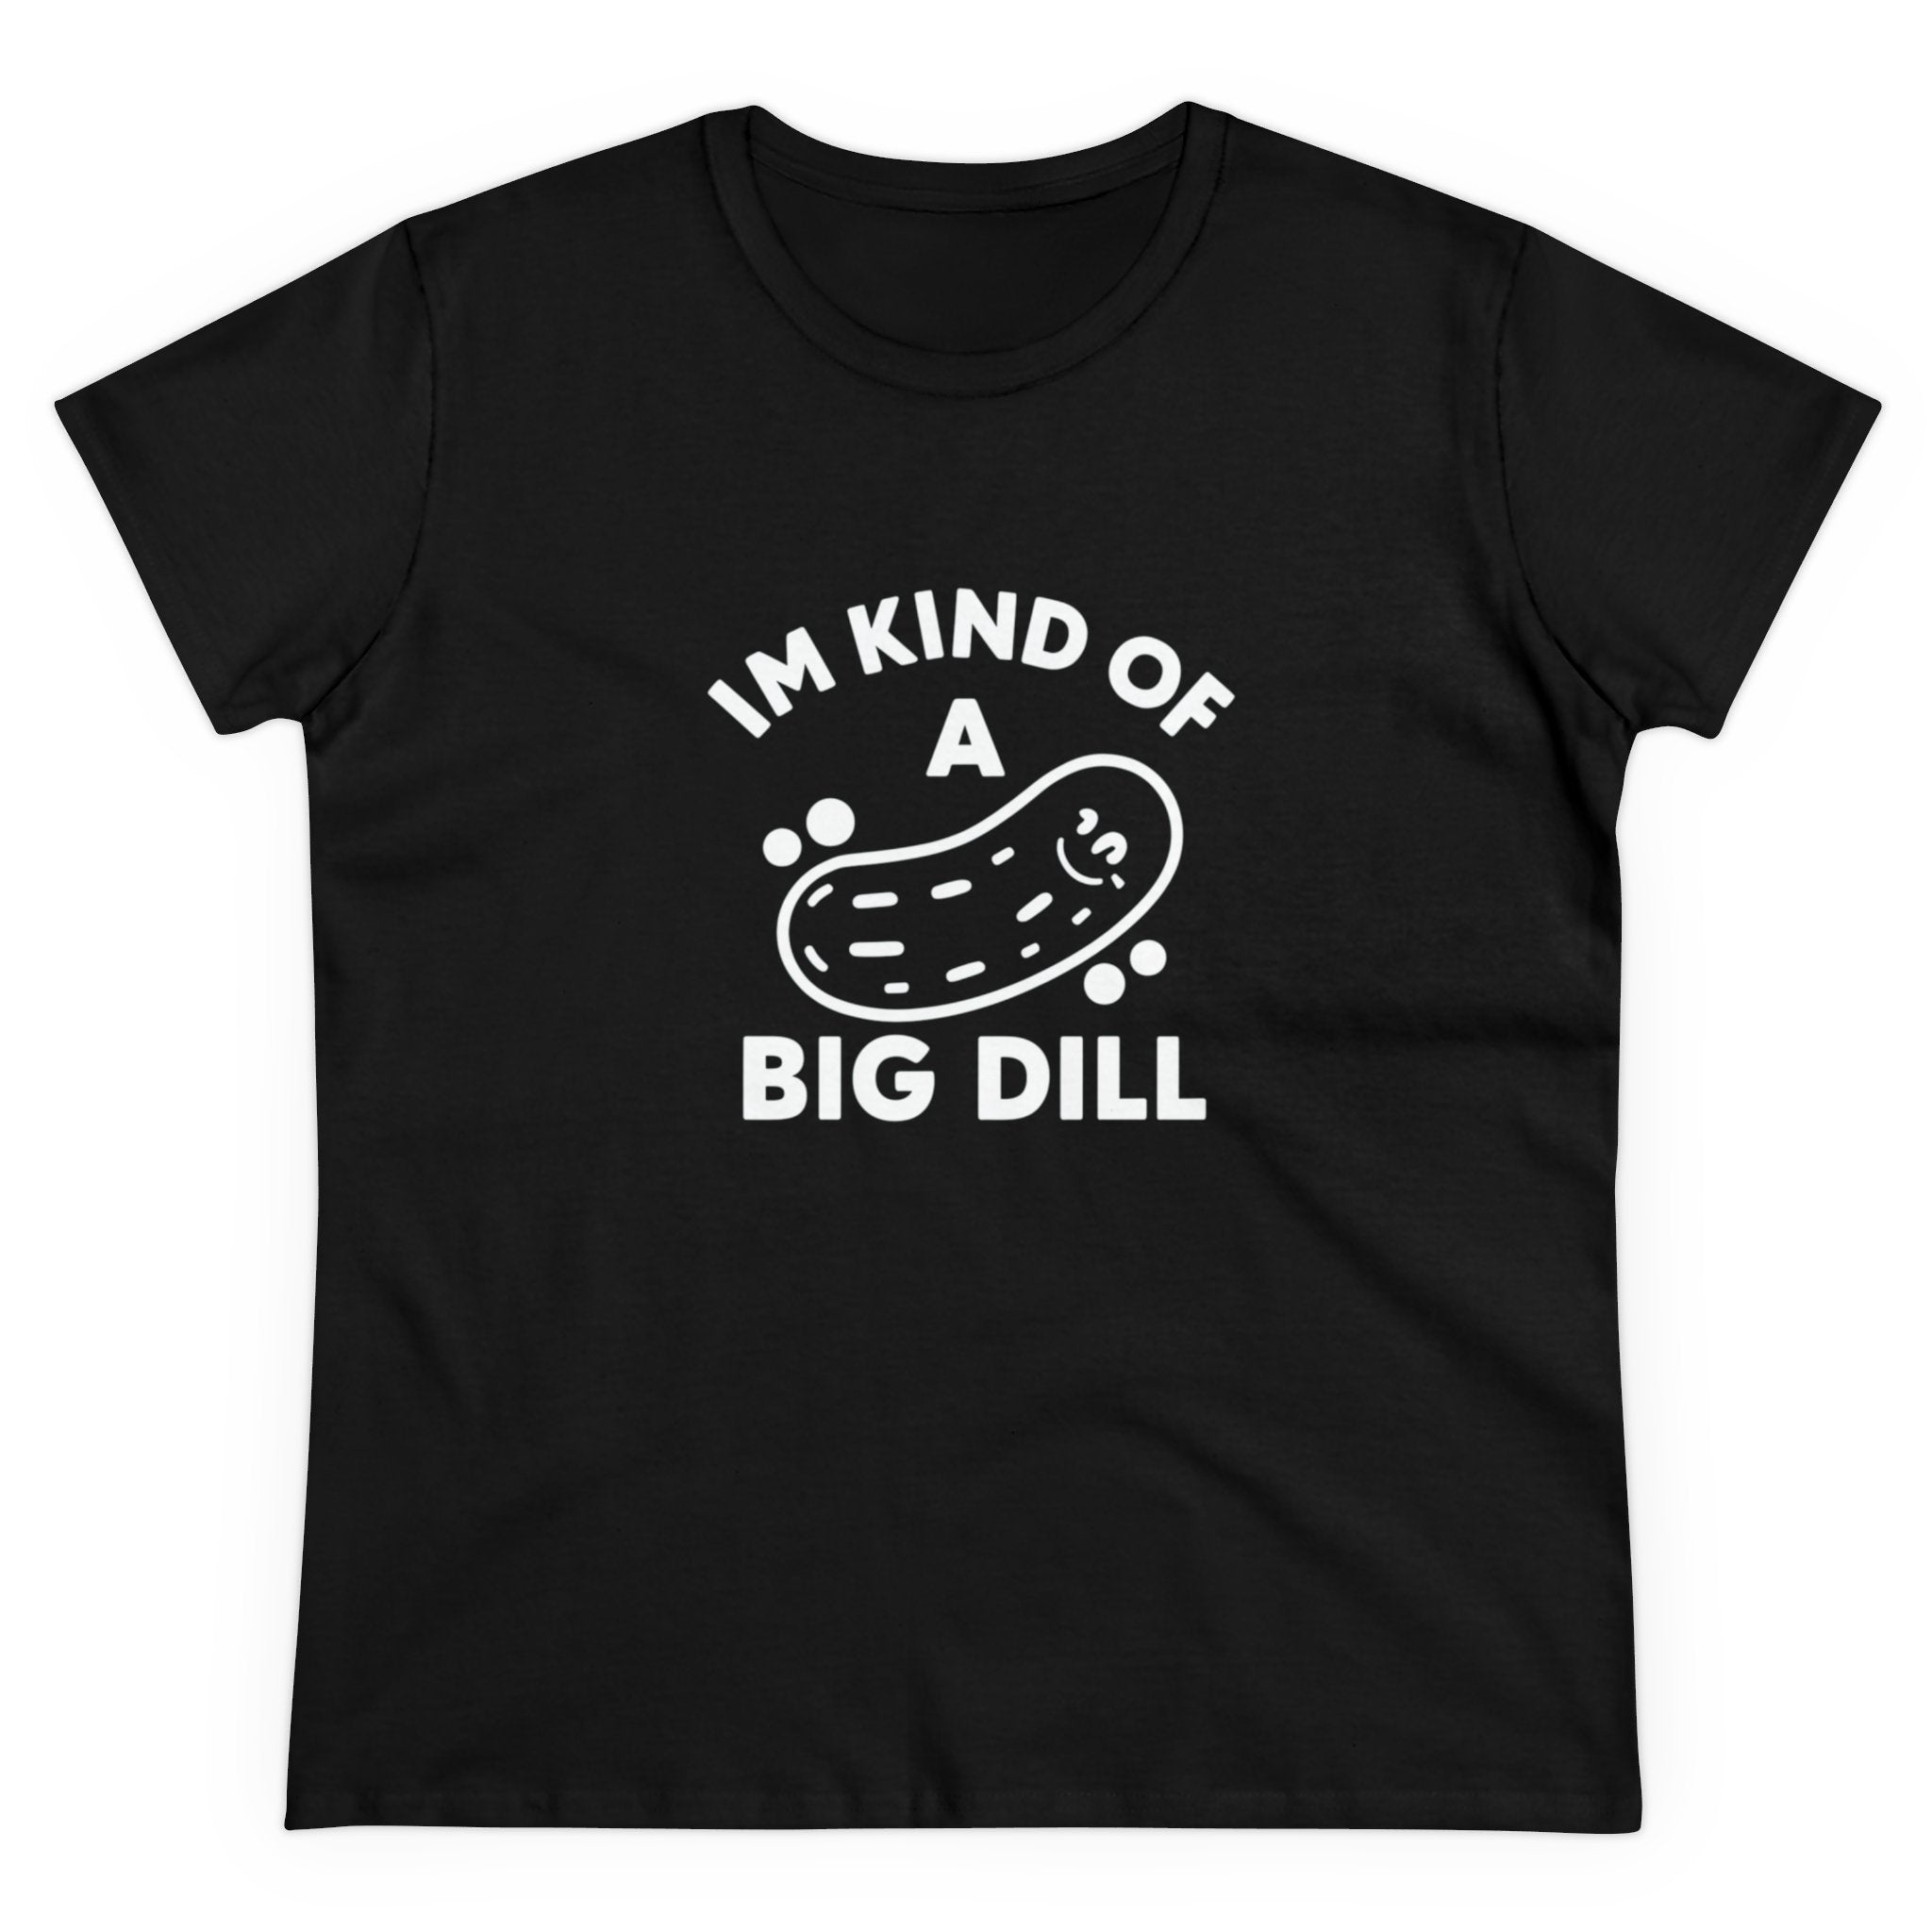 This I'M KIND OF A BIG DILL - Women's Tee is a black cotton pre-shrunk t-shirt featuring a graphic of a pickle and text that reads "I'm Kind of a Big Dill.